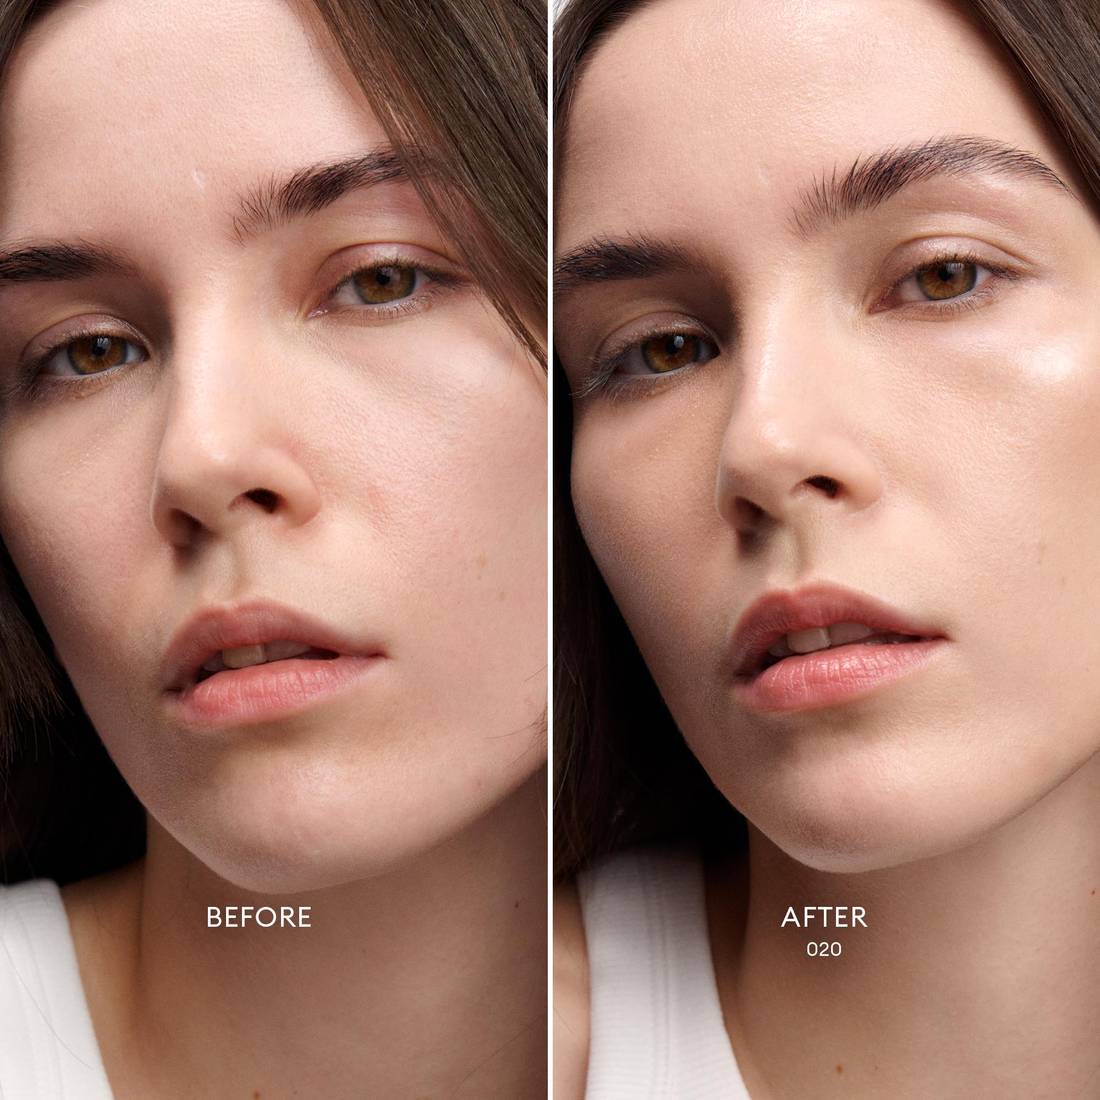 Before and After image of Light Skin Tone/Warm Peach Undertone model wearing Skin Enhance Luminous Tinted Serum in shade 020. 3